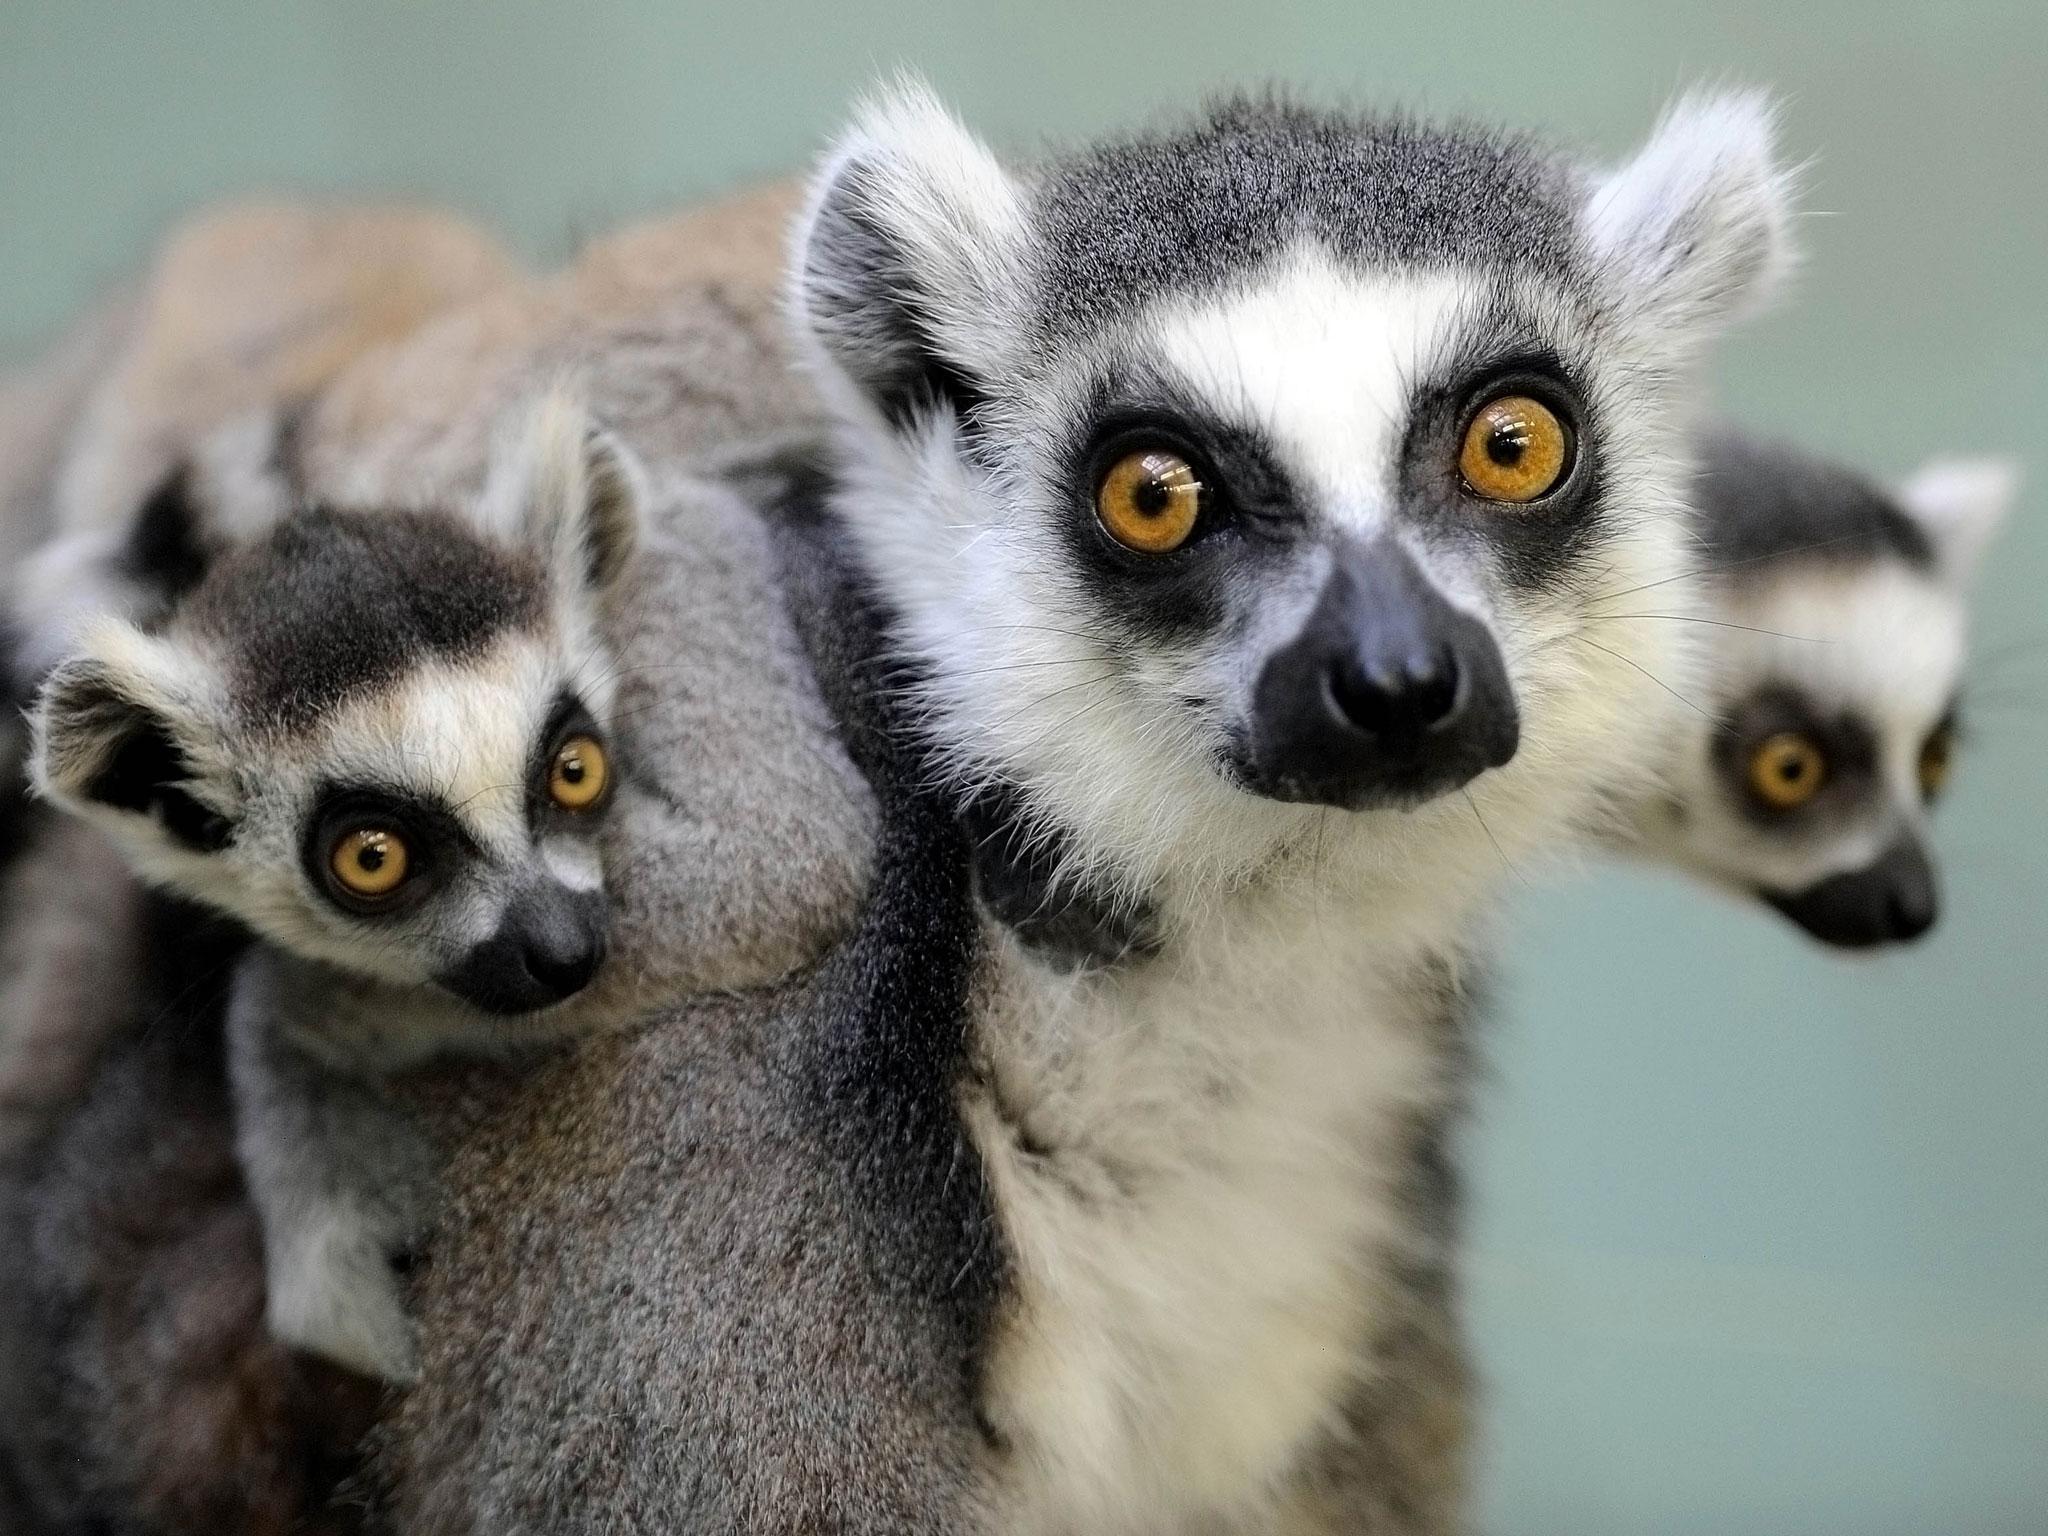 Ring-tailed lemurs are social animals and live in large groups dominated by females